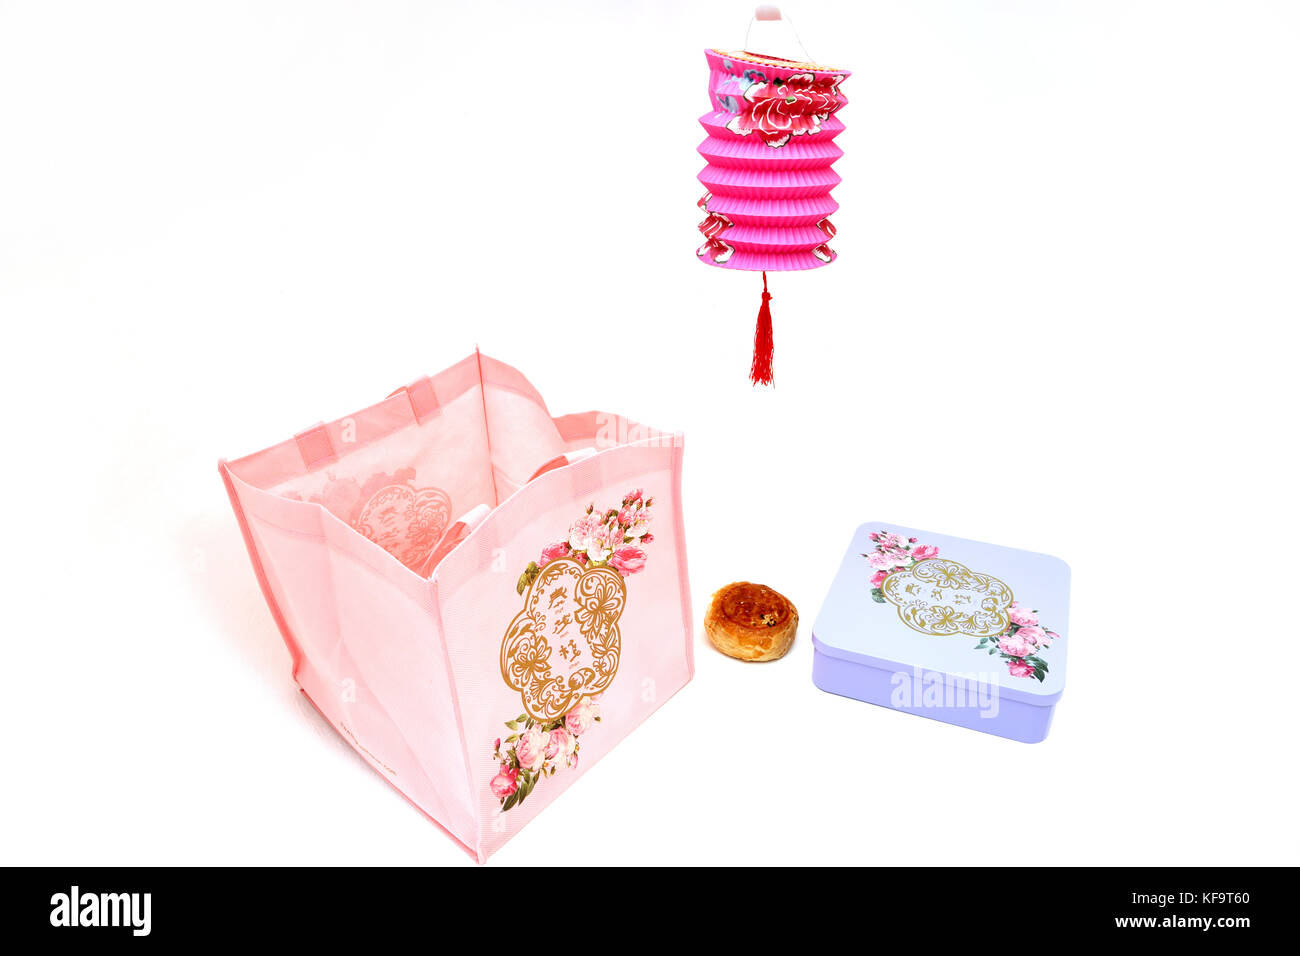 Teochew Mooncake Gift Set - Yuan Yang With Salted Egg Yolk ,Tin of Mooncakes, Thye Moh Chan Tote Bag, and Chinese Lantern Stock Photo